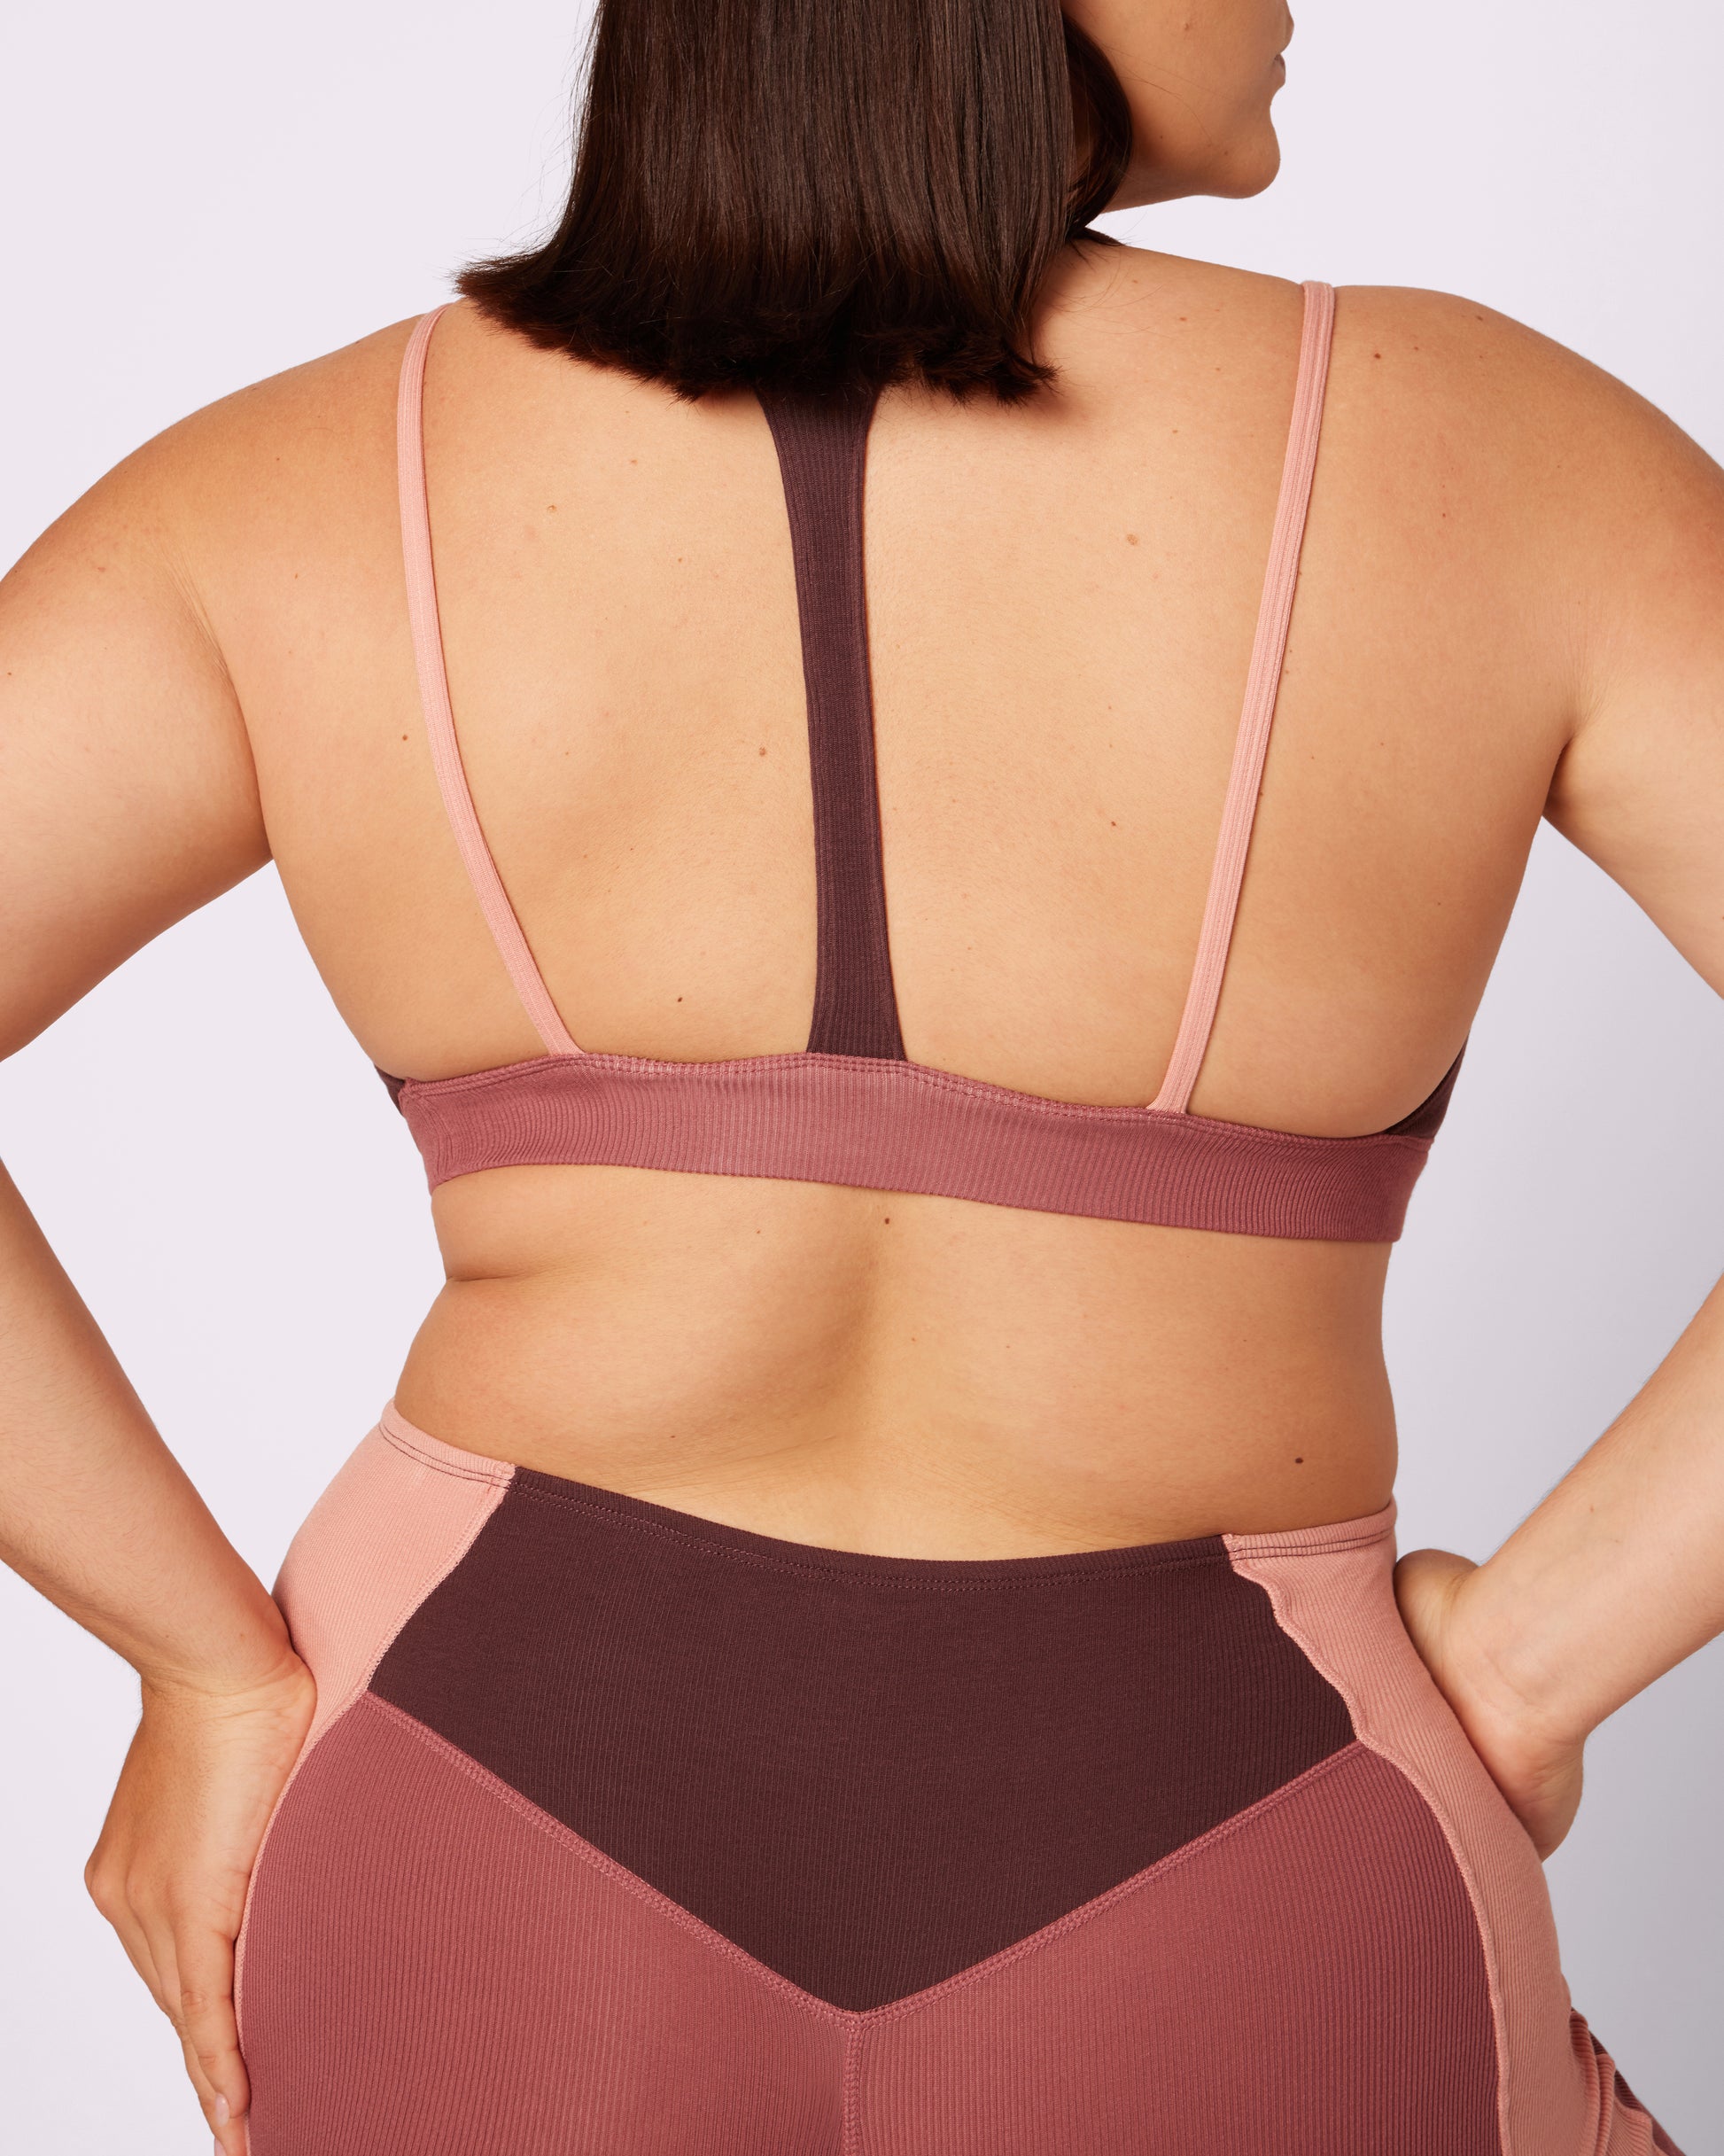 Peek-a-Boo We See You in this Ultimately Sexy and Sporty Underwear fro